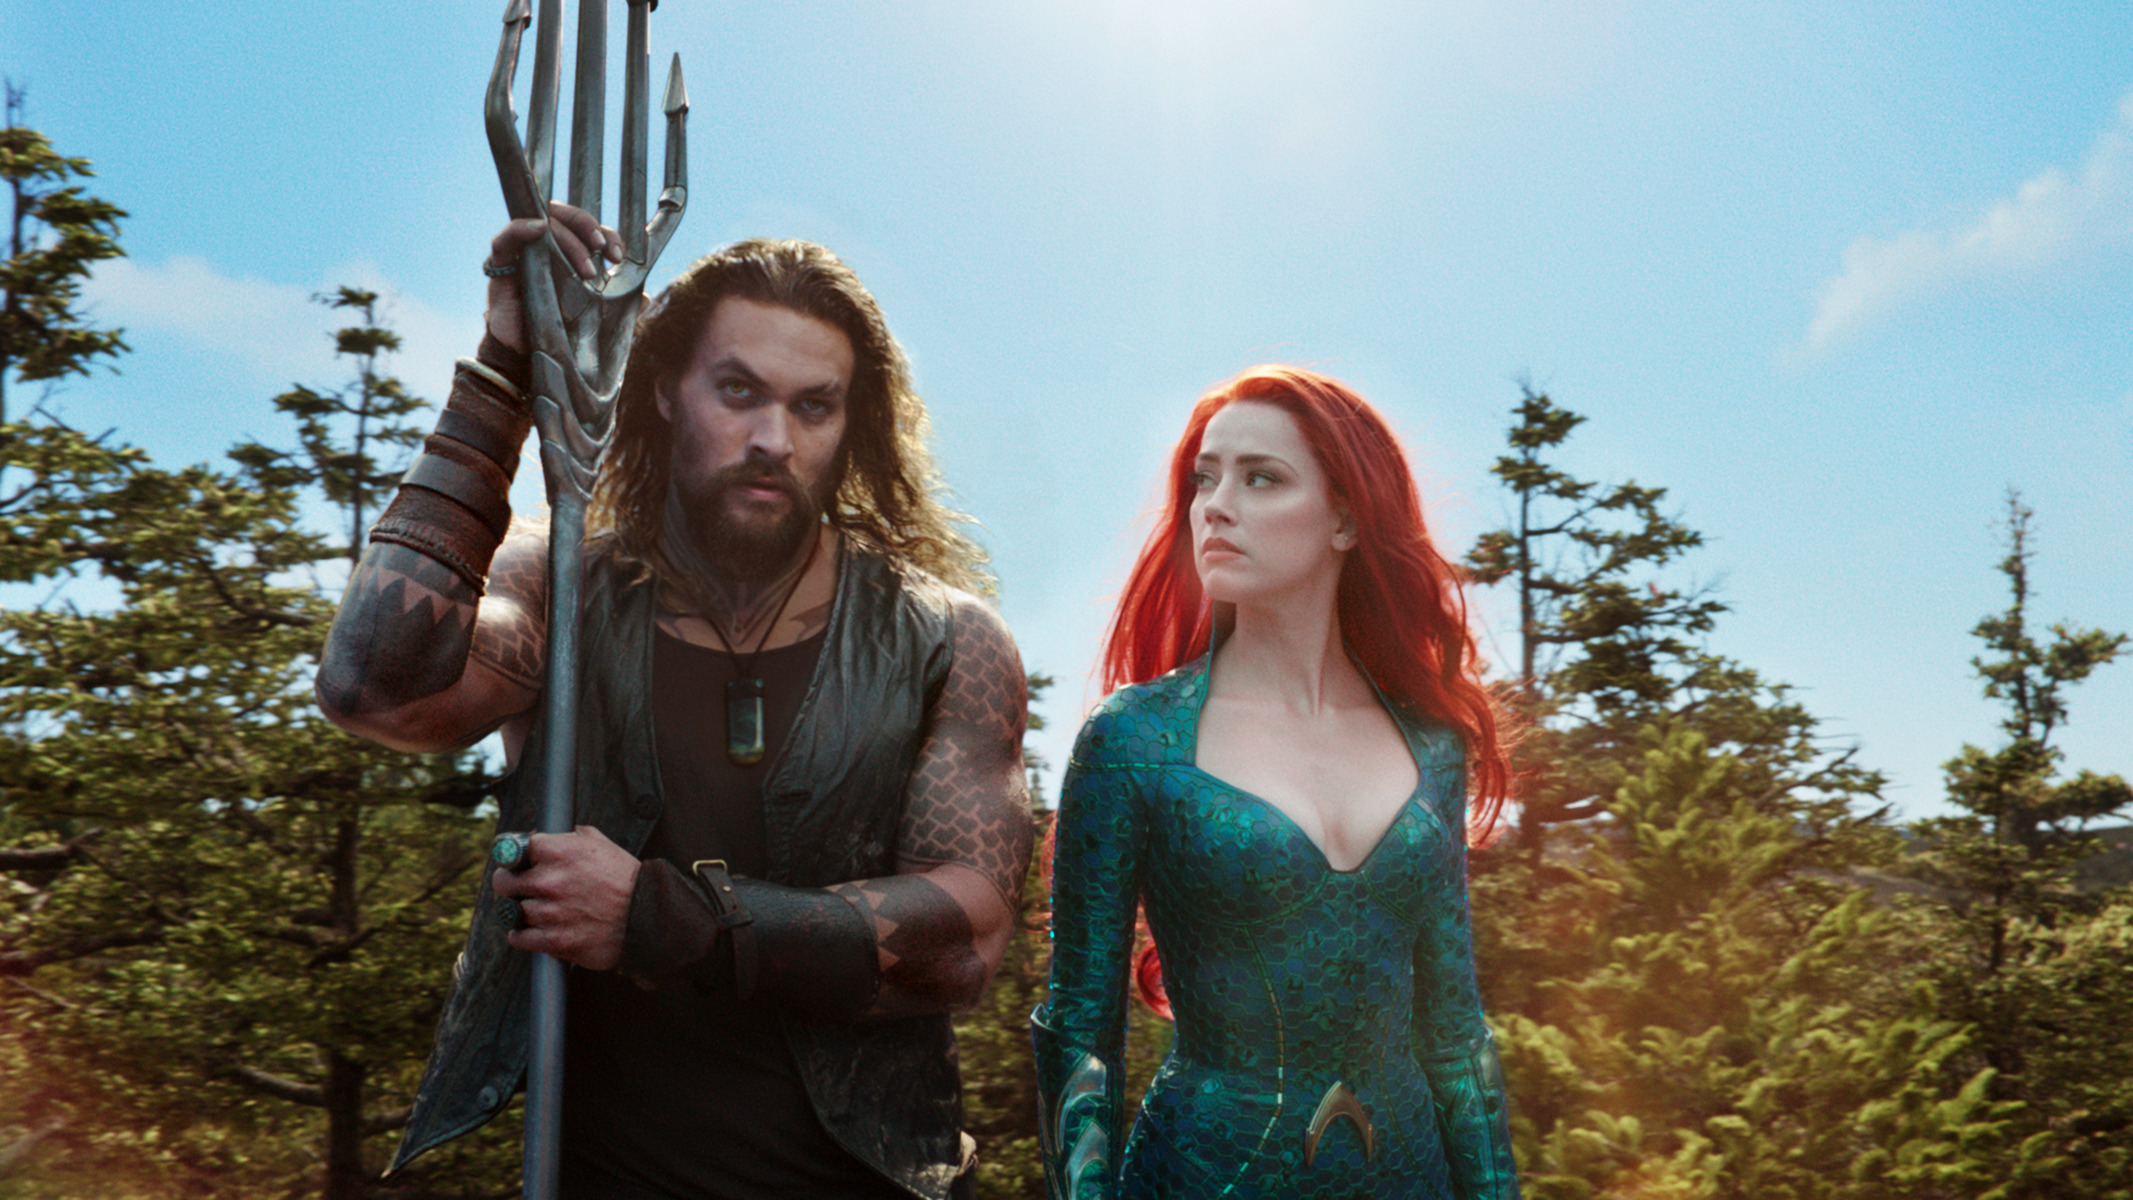 Aquaman 2 Plot Details, Cast and Connection with DC Movies